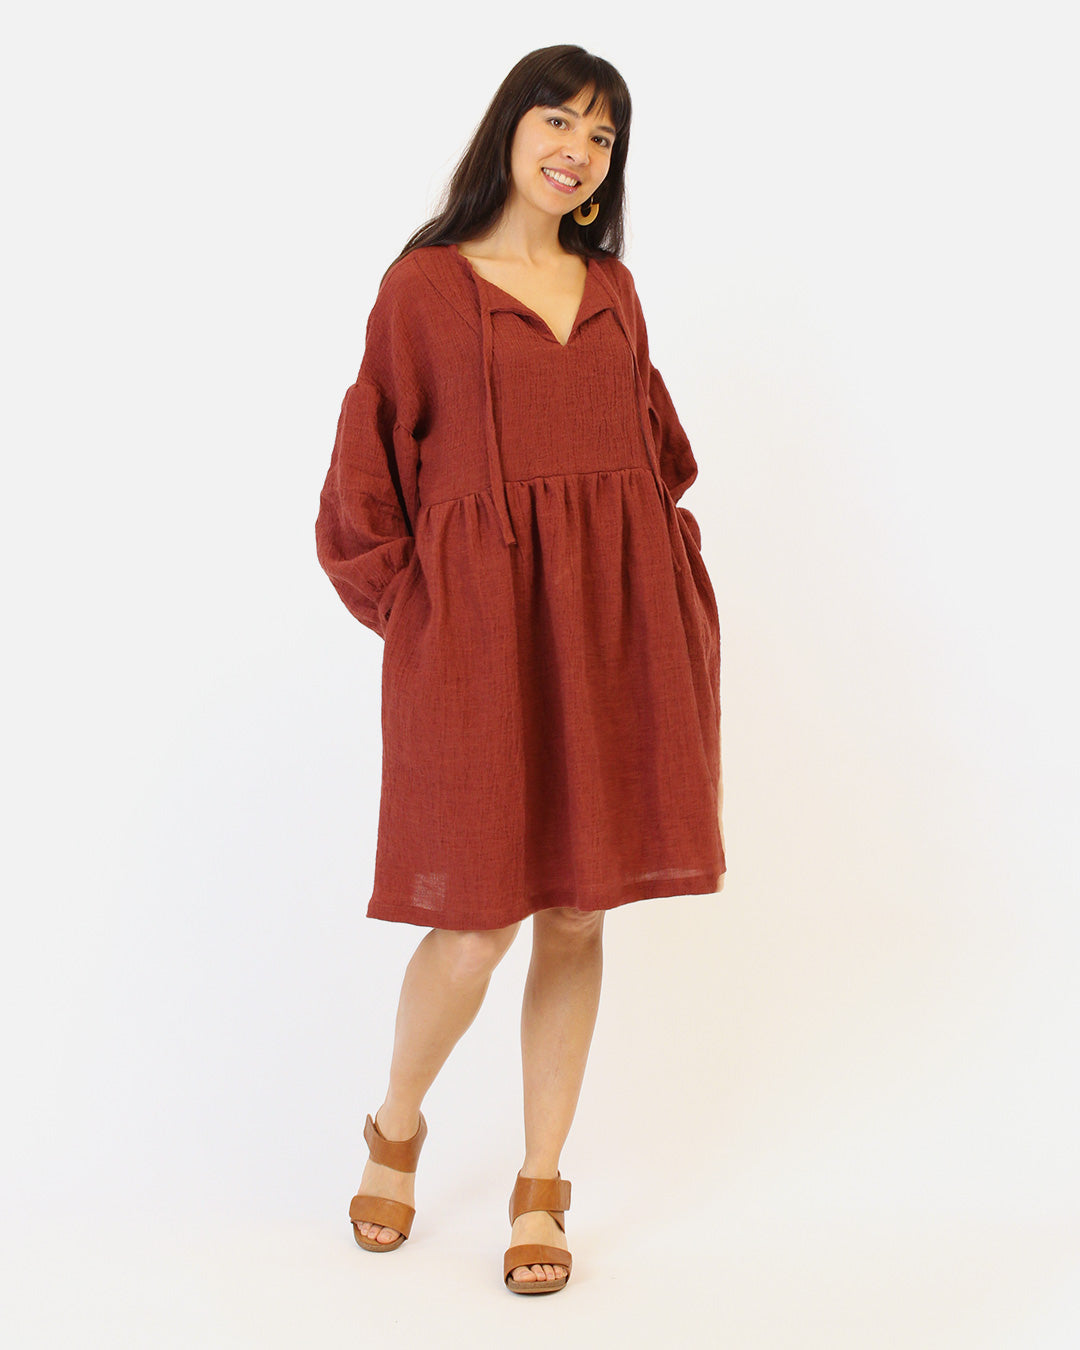 Woman wearing the March Dress sewing pattern by Helens Closet. A dress pattern made in light to medium weight woven fabrics with no stretch, featuring a relaxed fit, voluminous long sleeves, gathered skirt, and a neck tie that you can tie in the front or 